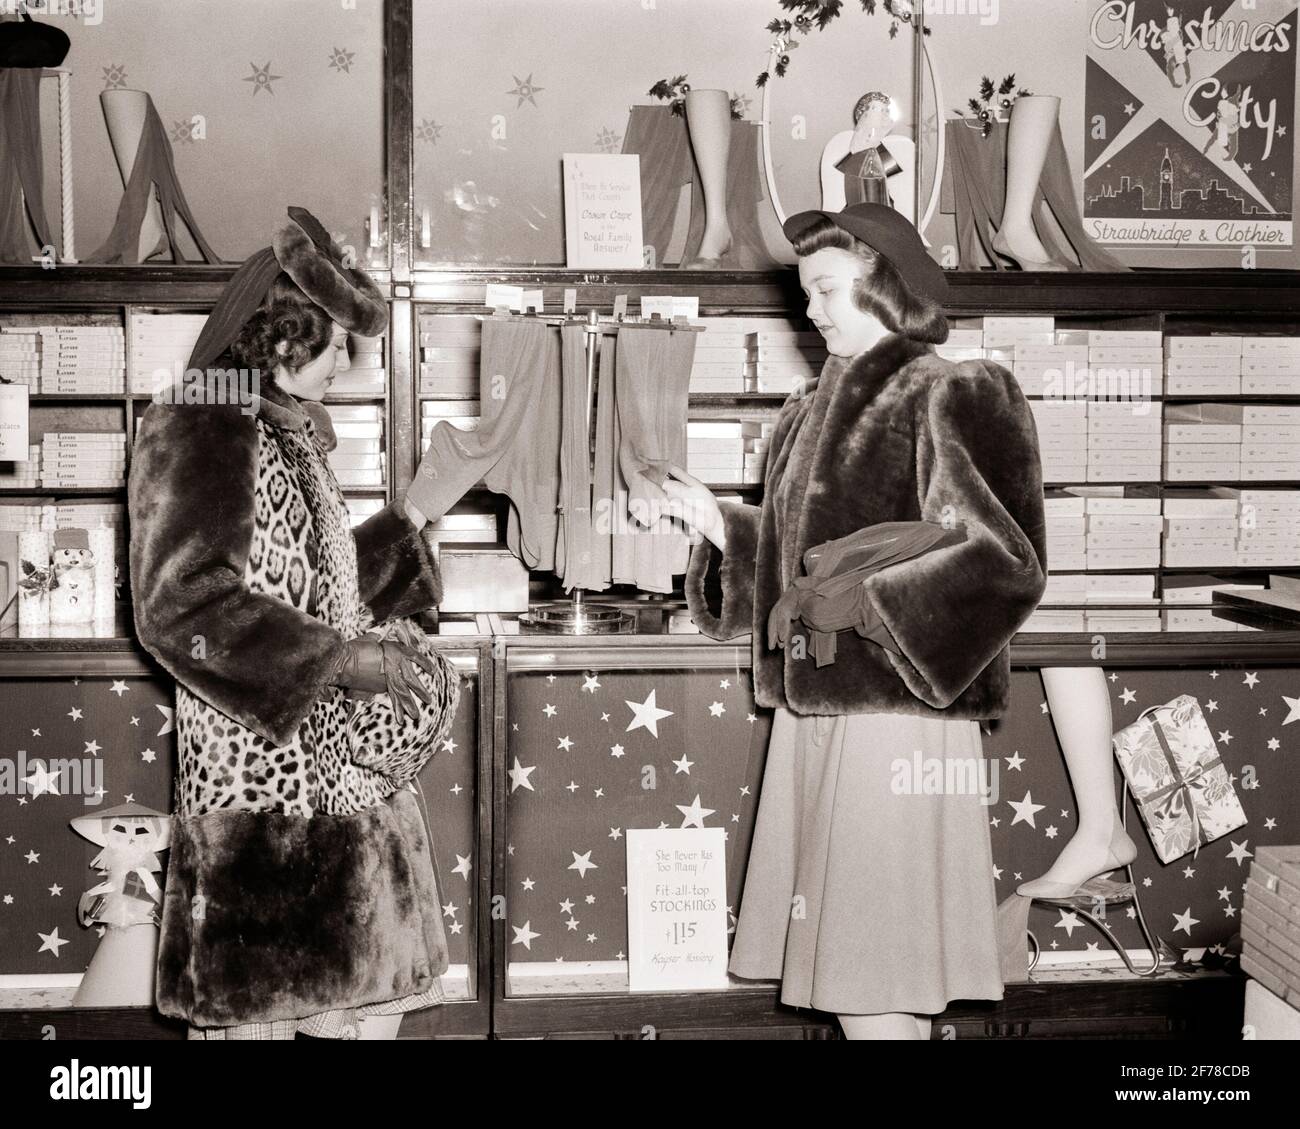 1940s TWO WELL DRESSED WOMEN CHRISTMAS DEPARTMENT STORE SHOPPING FOR SILK STOCKINGS WEARING FUR COATS HATS PHILADELPHIA PA USA - s5795 HAR001 HARS STYLE FRIEND LEOPARD WEALTHY DEPARTMENT DECORATIONS RICH LIFESTYLE FEMALES COATS LUXURY FRIENDSHIP HALF-LENGTH LADIES PERSONS SHOPS SKIN B&W SHOPPER SHOPPERS DISCOVERY STYLES AND PA STORES UPSCALE HOSIERY NYLONS AFFLUENT FRIENDLY STYLISH CLOTHIER COMMERCE FASHIONS FURS MID-ADULT MID-ADULT WOMAN STRAWBRIDGE WELL-TO-DO BLACK AND WHITE BUSINESSES CAUCASIAN ETHNICITY HAR001 OLD FASHIONED Stock Photo